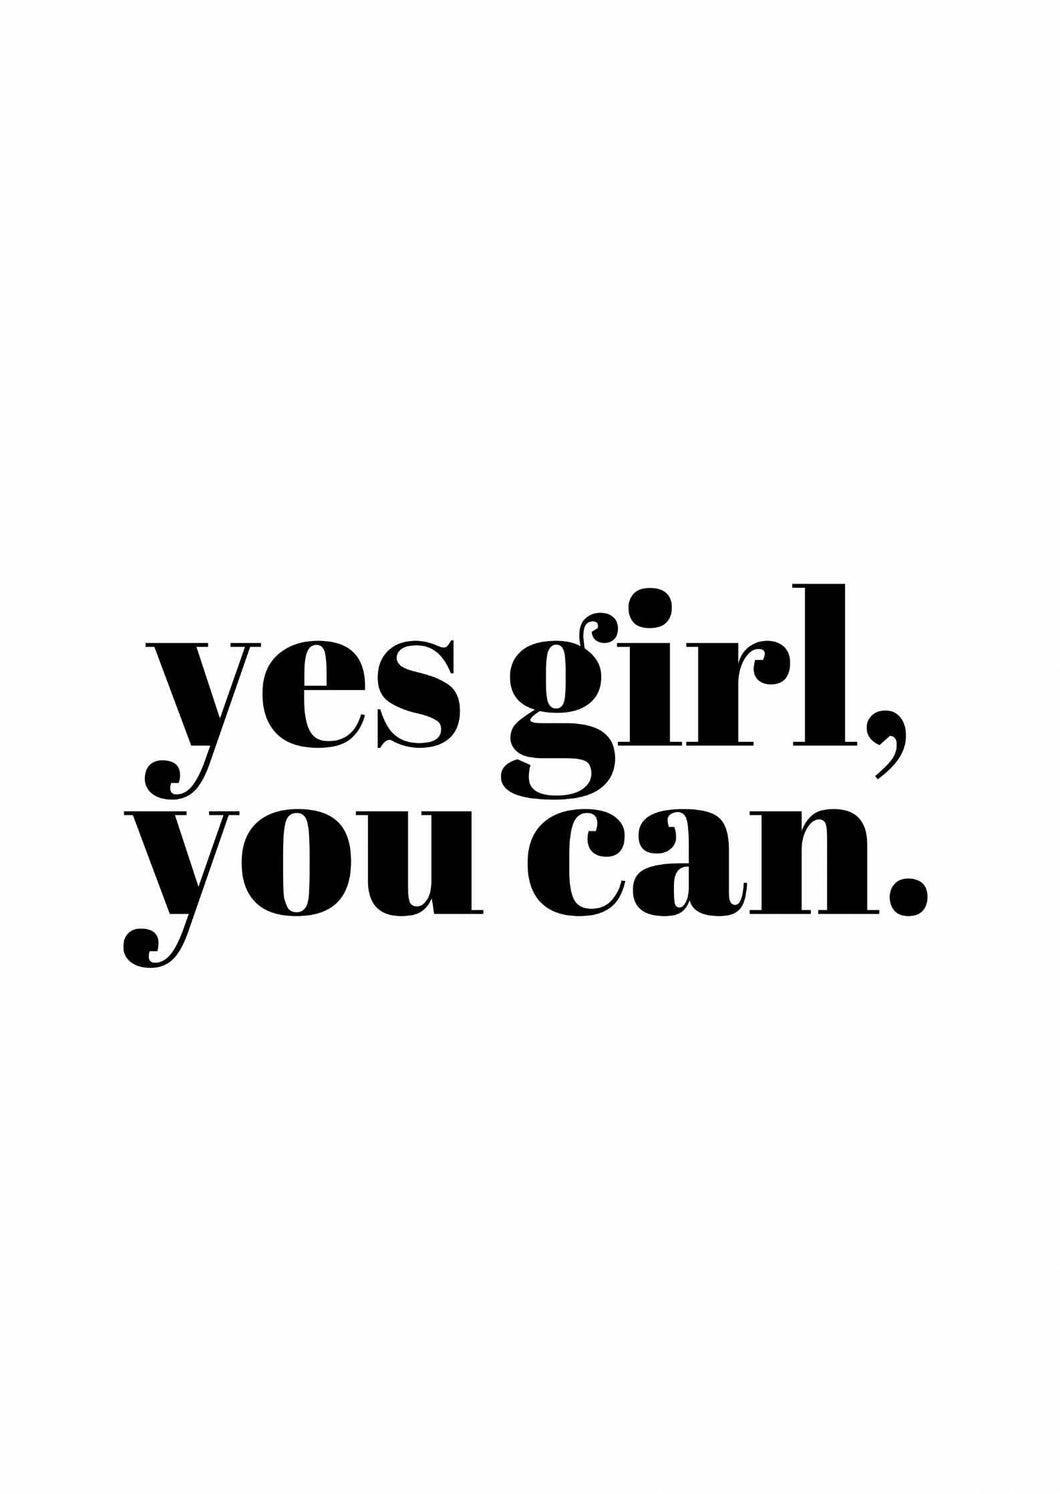 Yes girl, you can. - Chic Prints